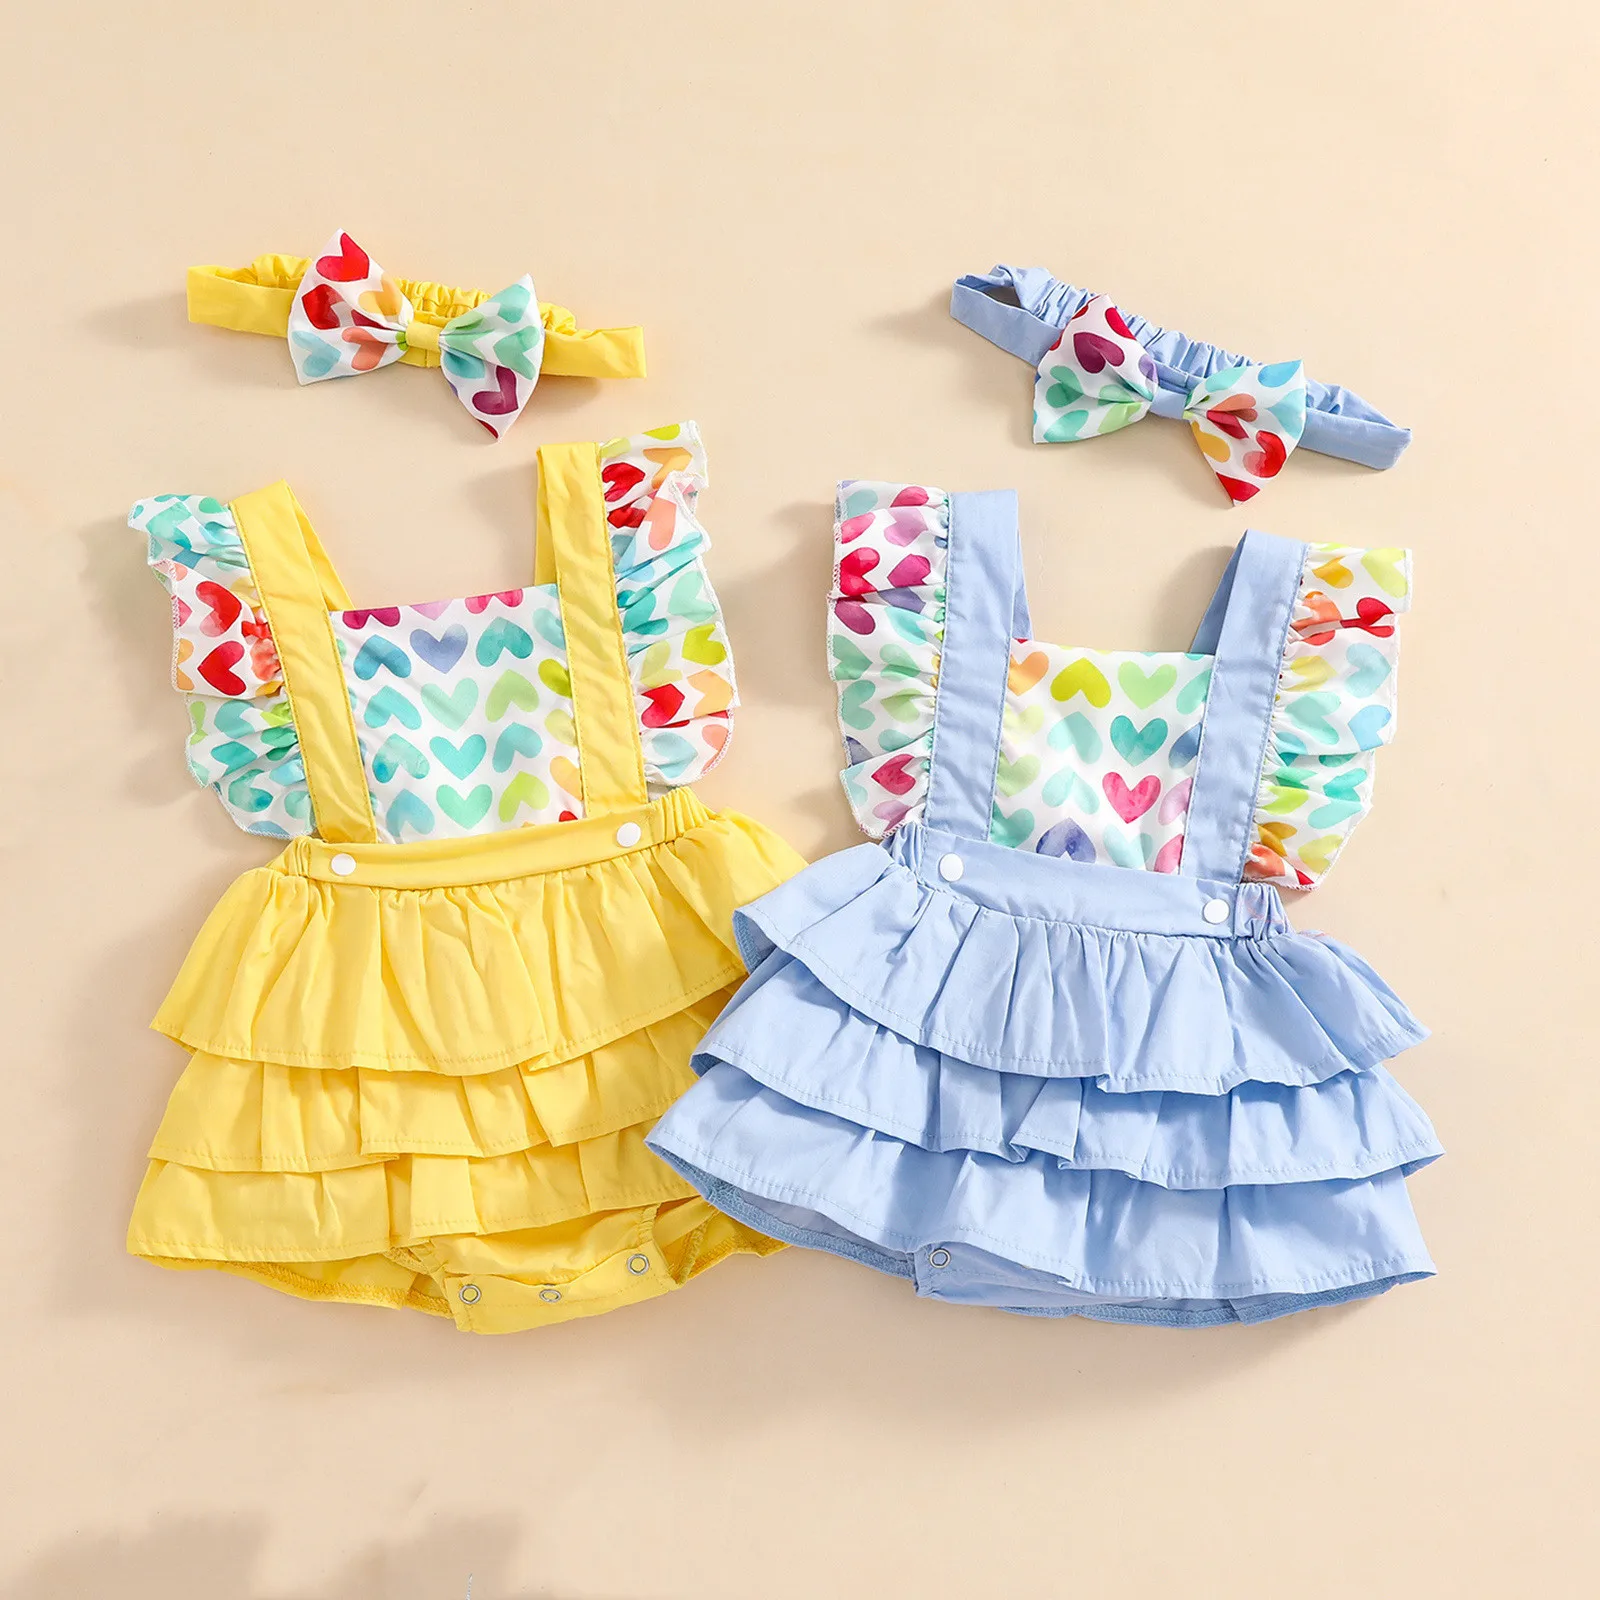 

Wholesale Baby girls jumpsuit ruffled sleeveless heart printed cotton dress romper and headband for baby, Picture shows